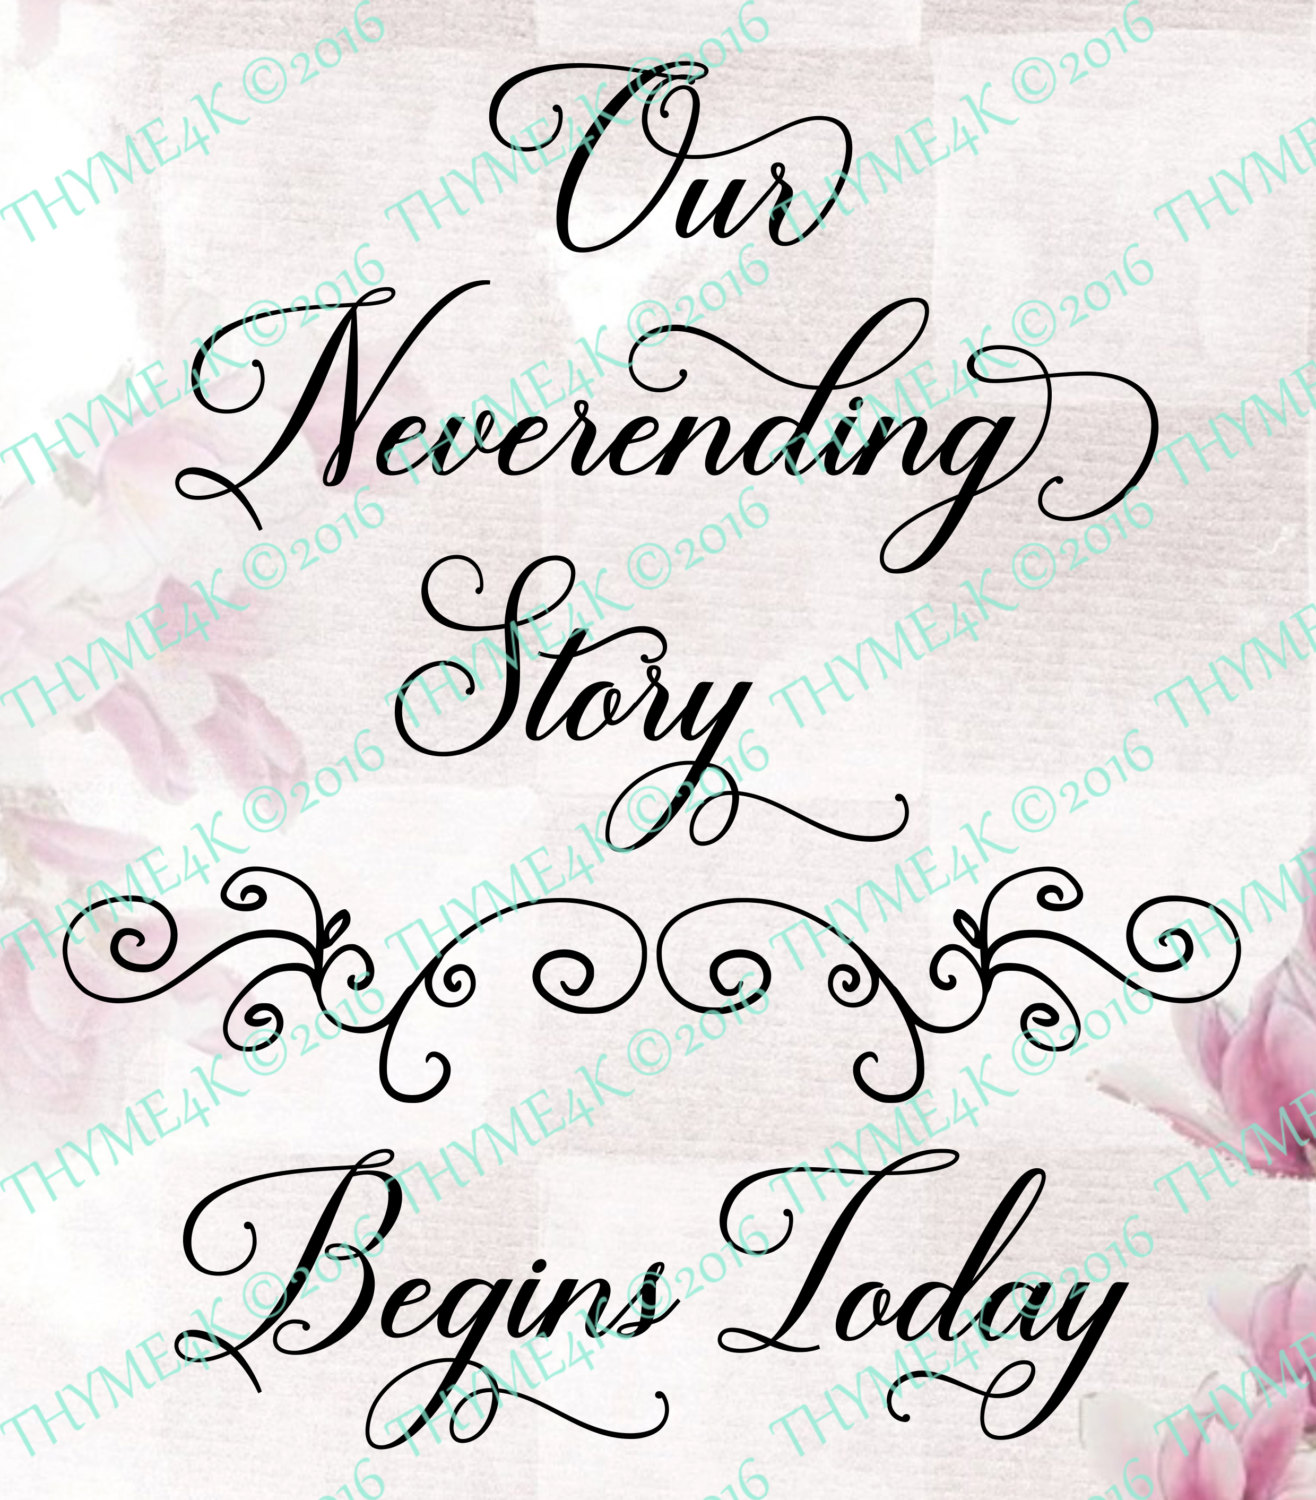 Neverending Story svg #16, Download drawings